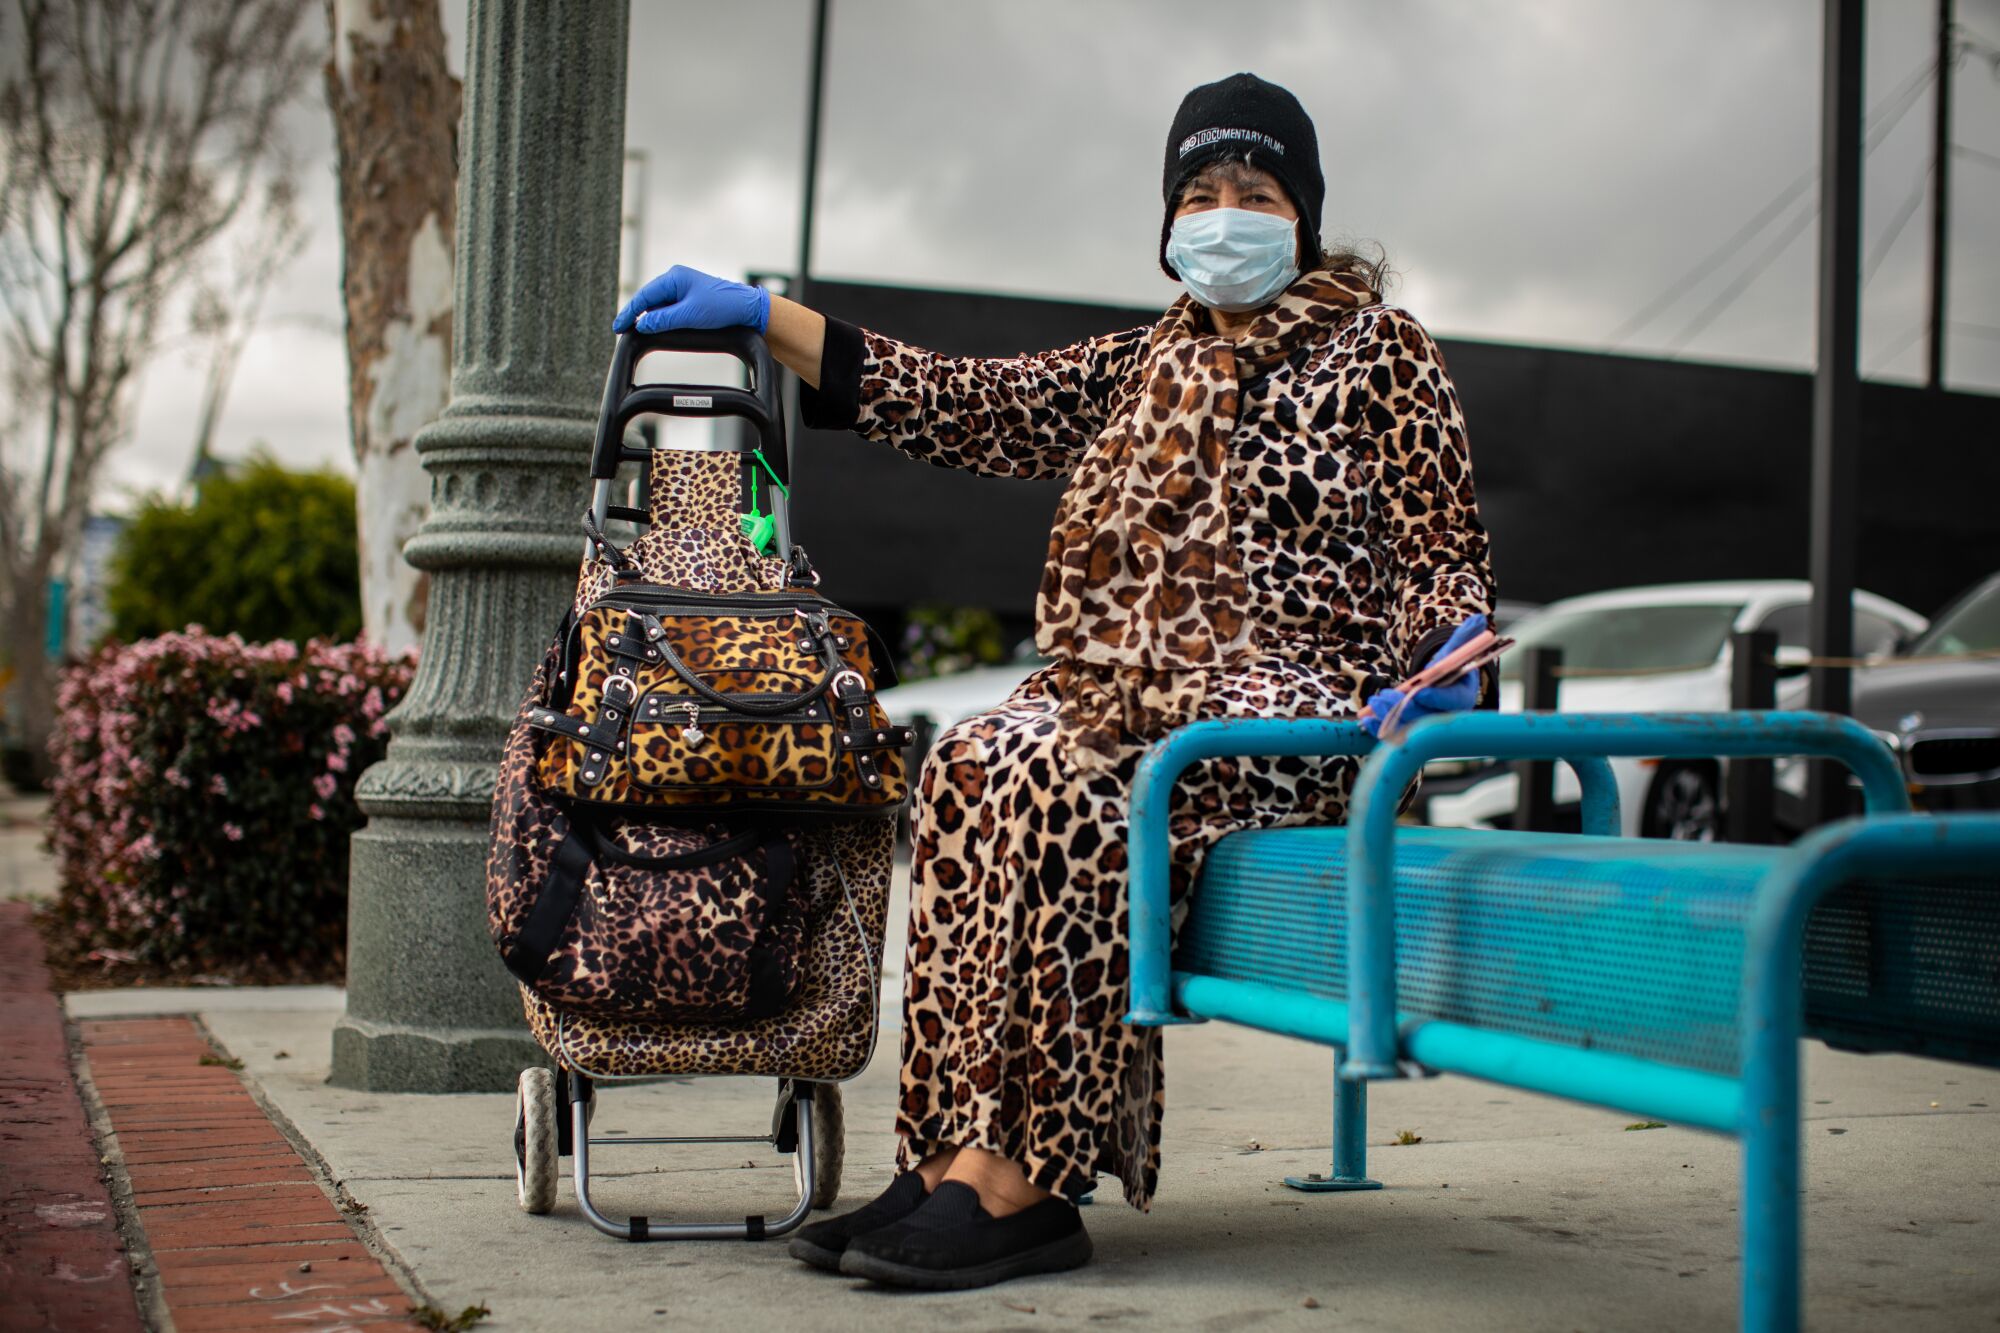 A woman named Sarah, who said tigers are her favorite, let out a growl while waiting for a bus on Hawthorne Boulevard in Lawndale.